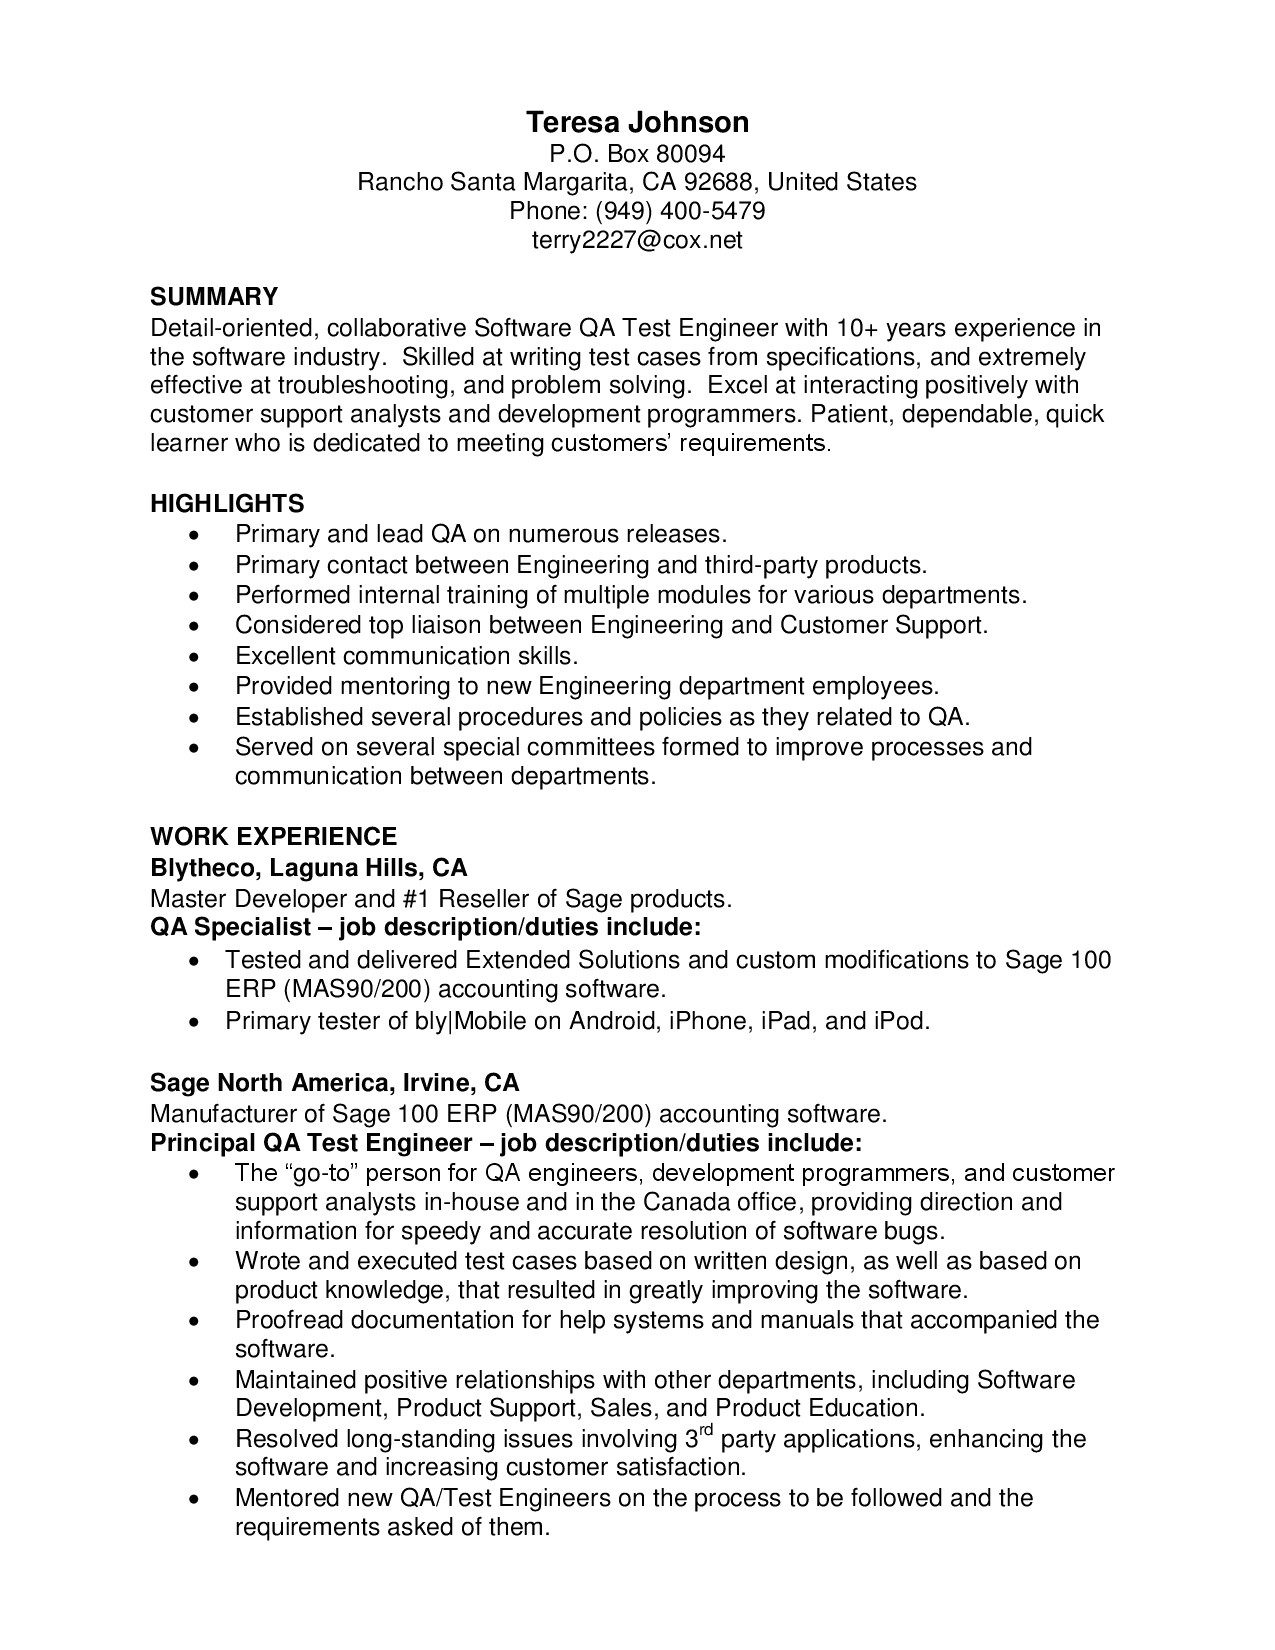 sample resume format for 2 years experience in testing